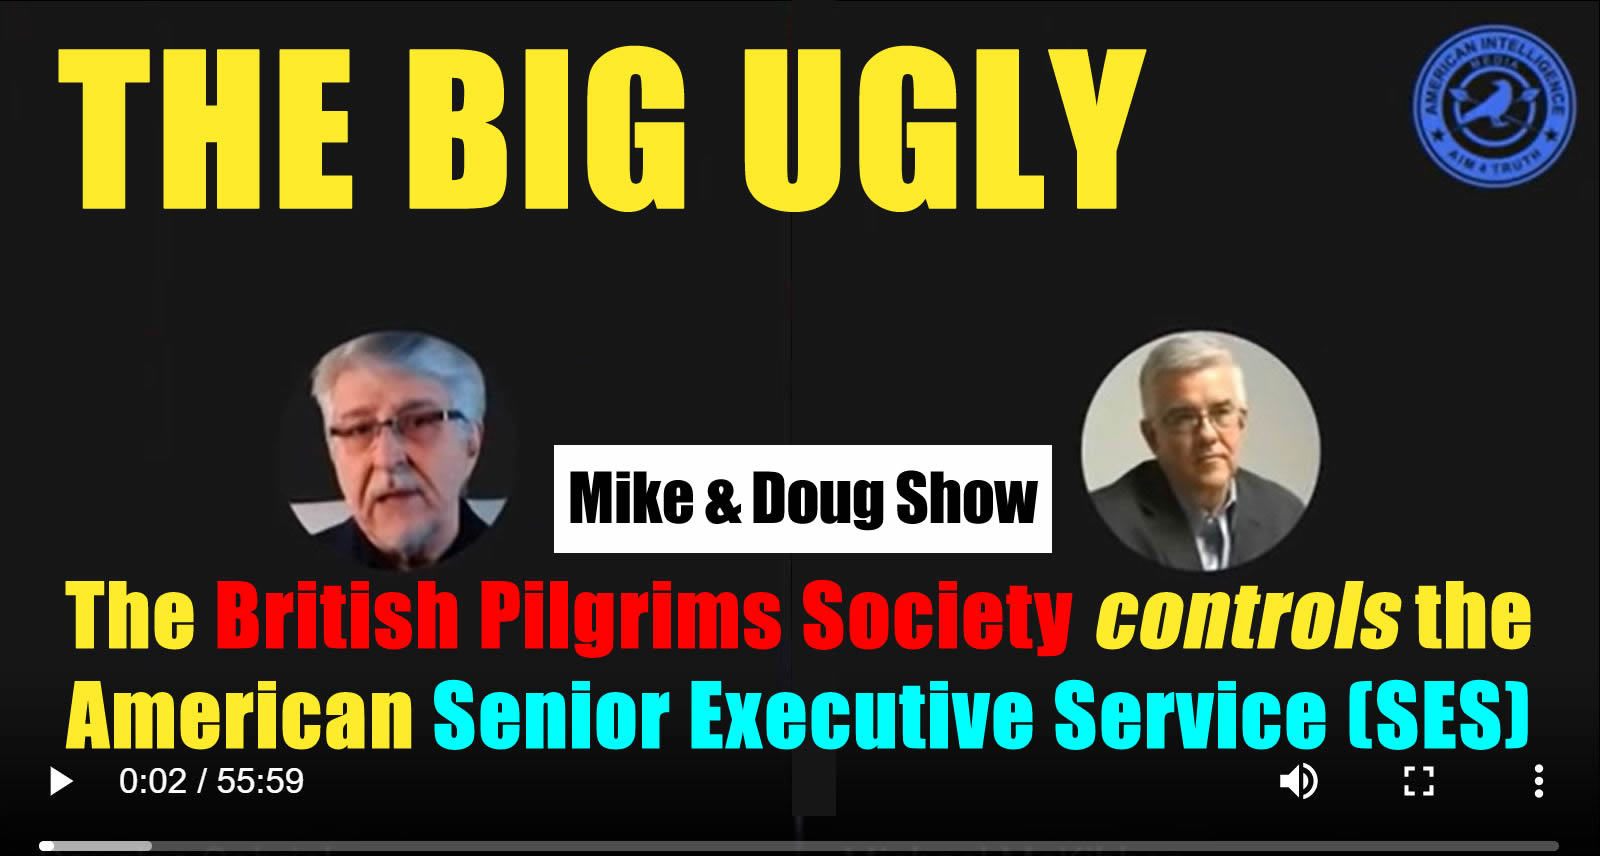 Gabriel, McKibben. (Oct. 11, 2019). Mike and Doug Show: The Big Ugly. American Intelligence Media, Americans for Innovation.